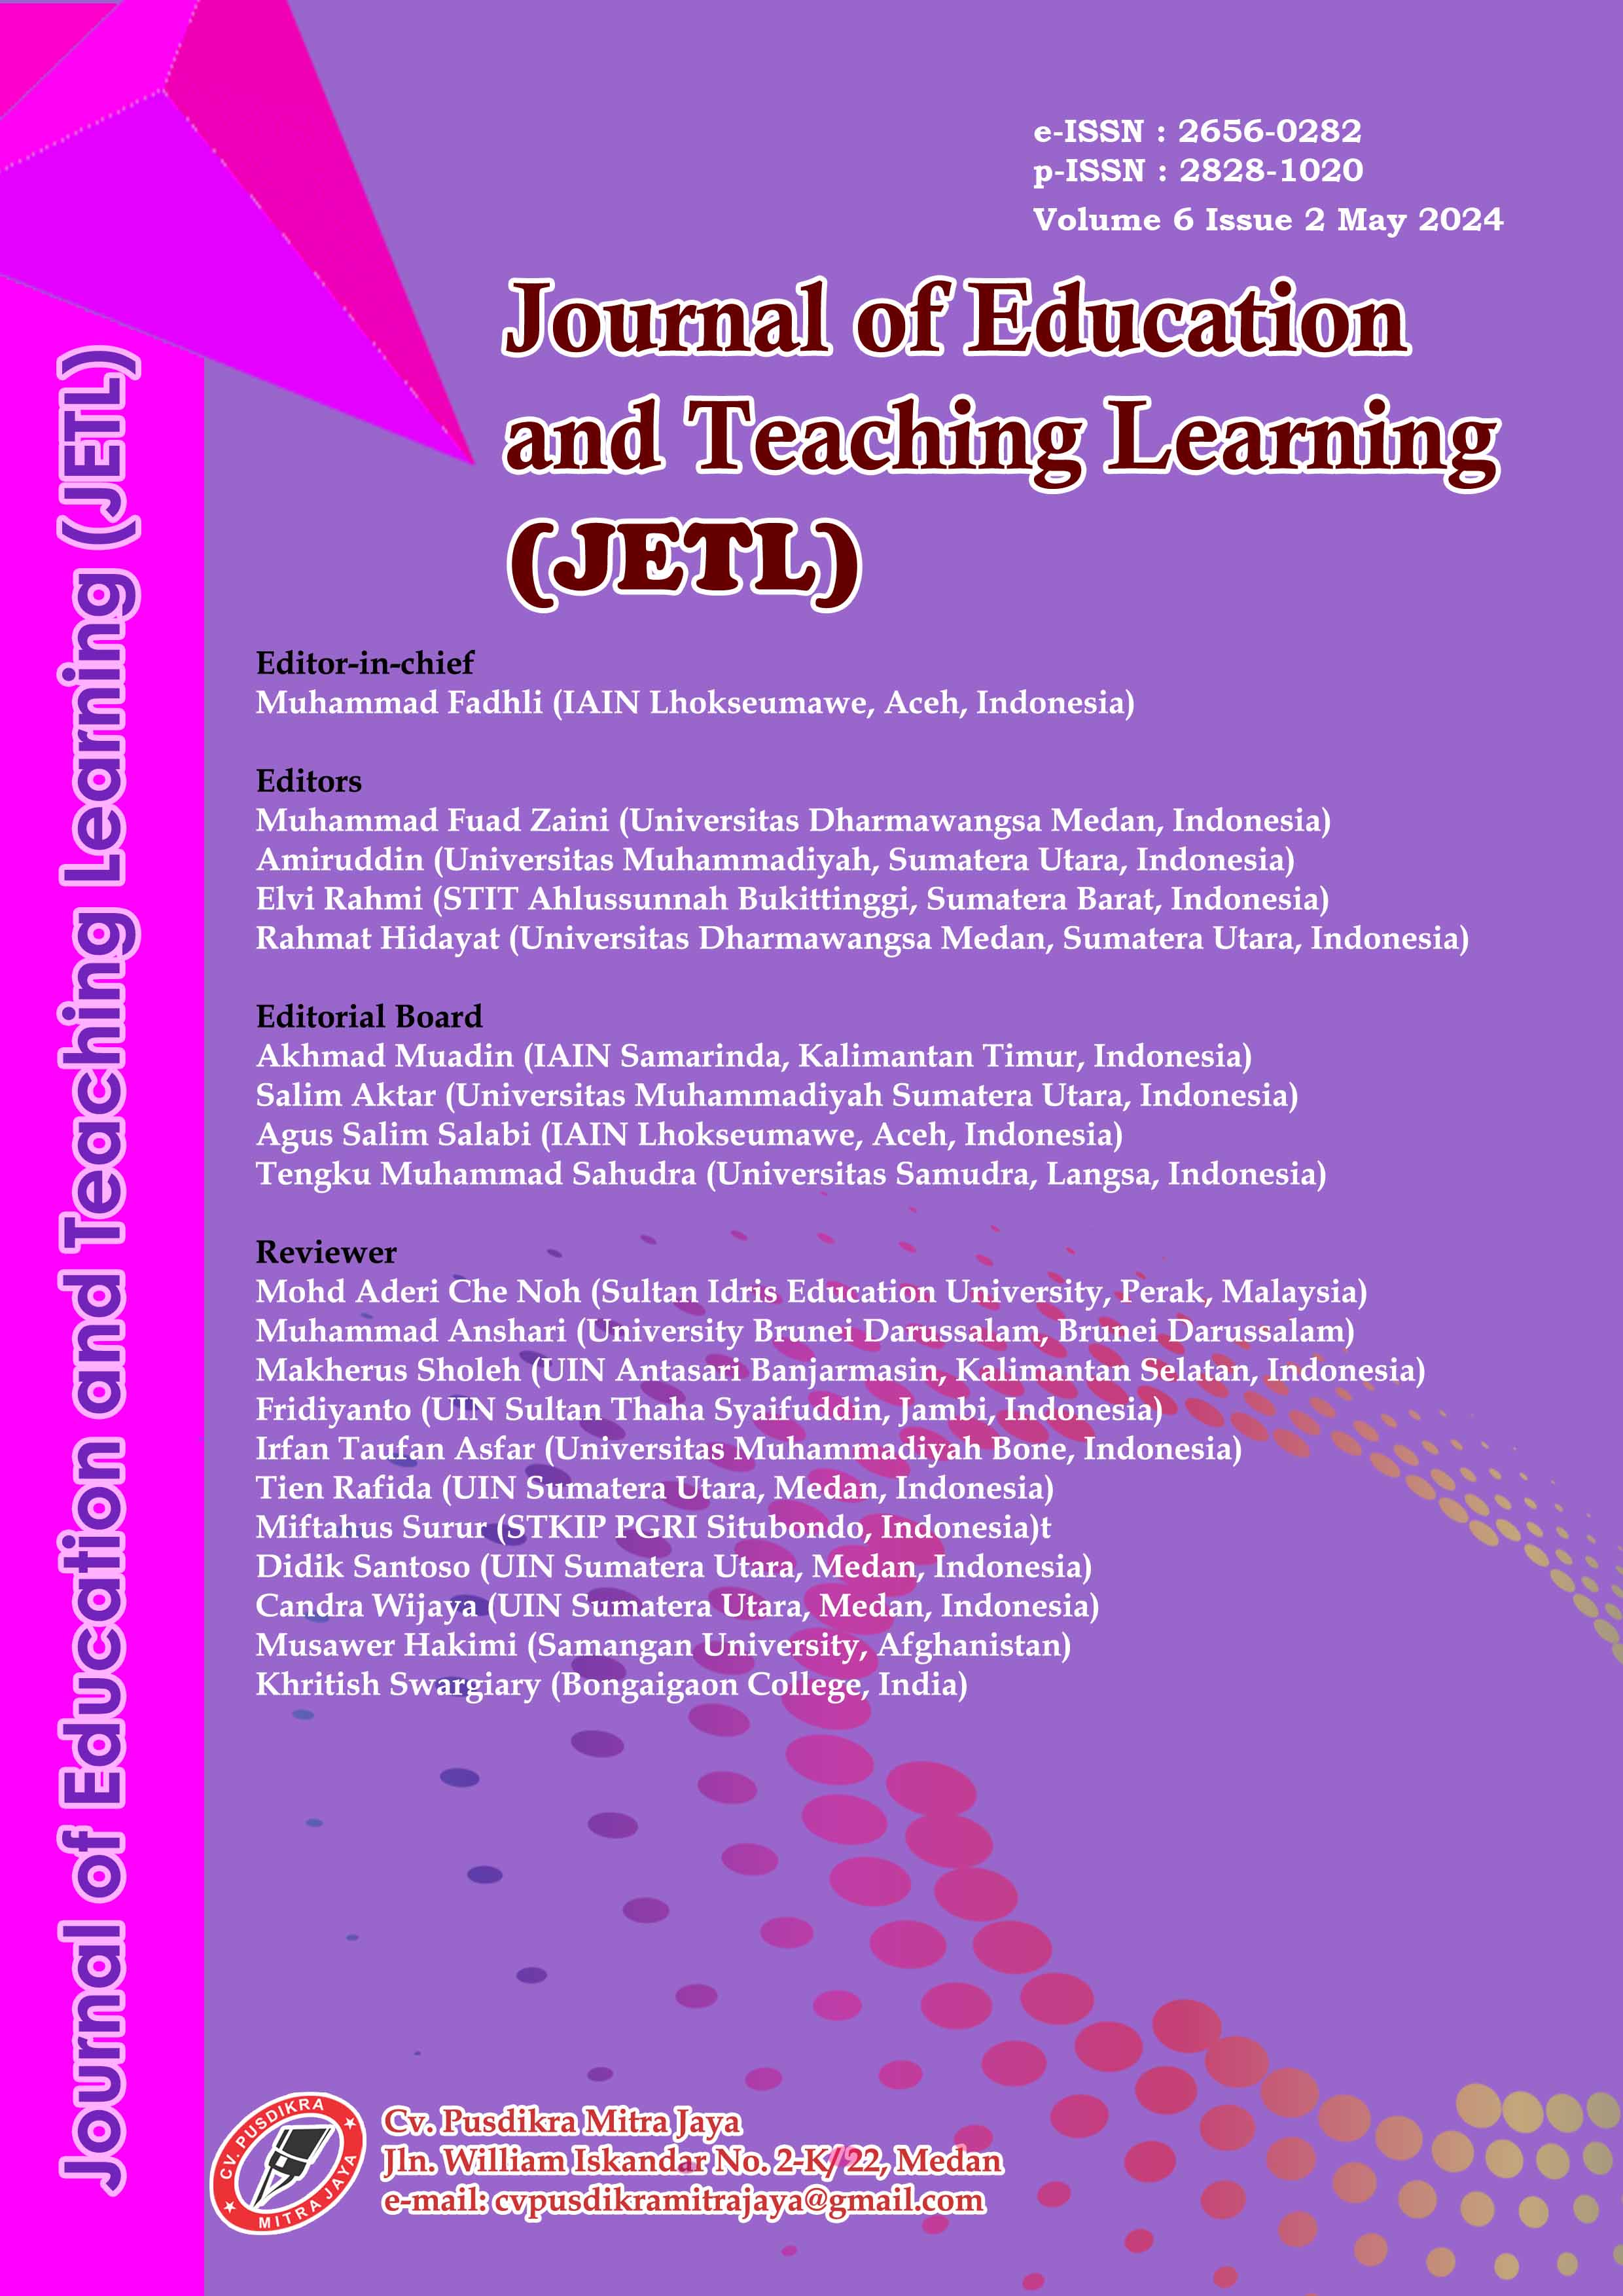 					View Vol. 6 No. 2 (2024): Journal of Education and Teaching Learning (JETL) | On Progress
				